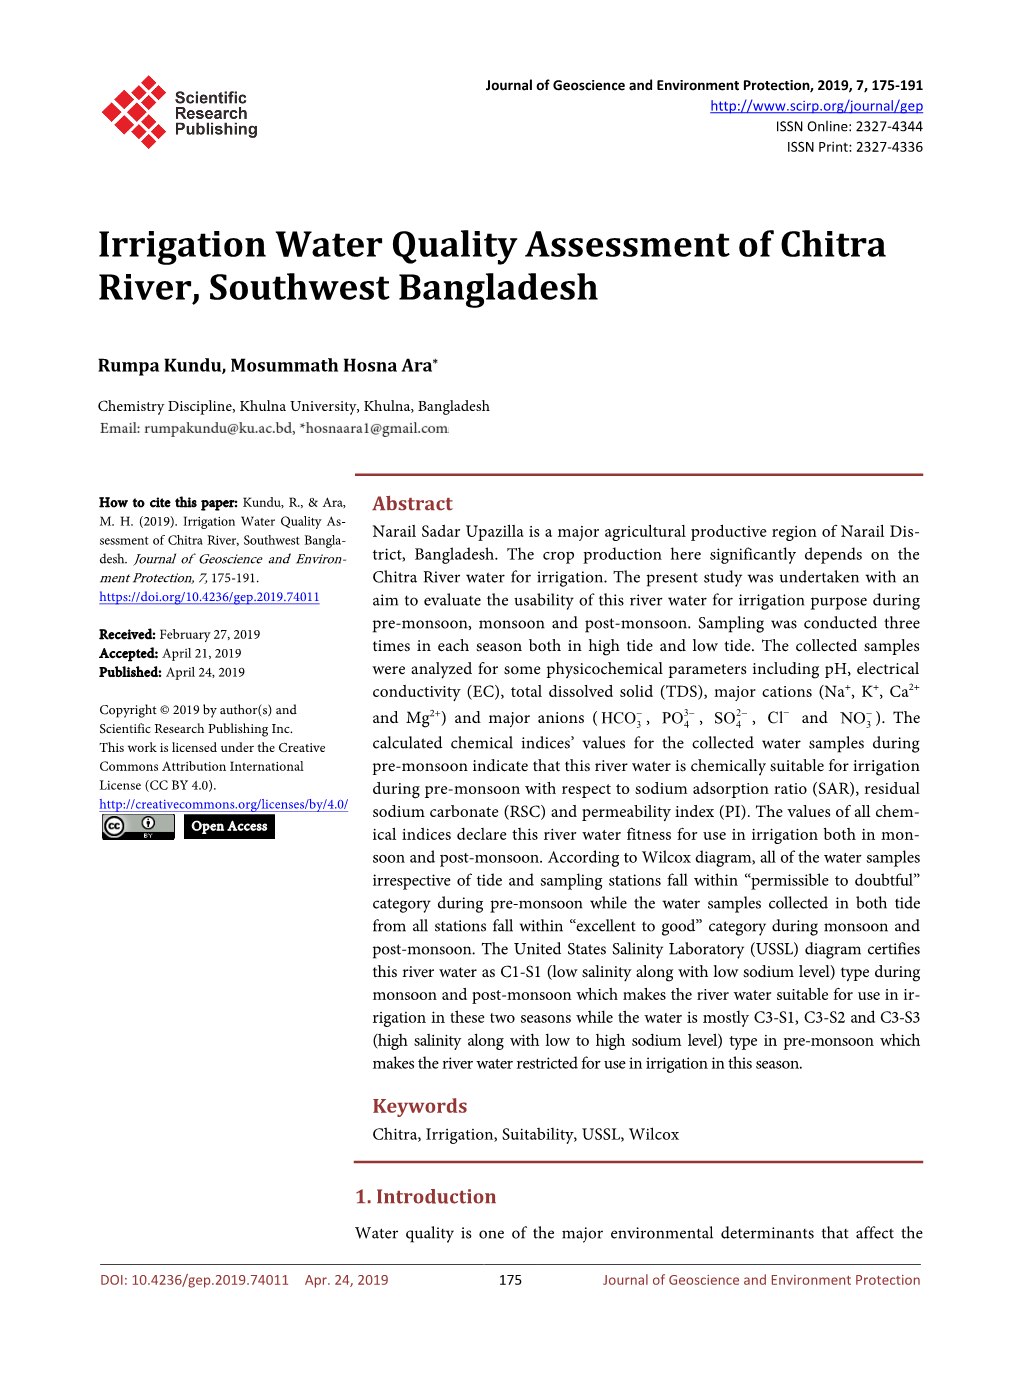 Irrigation Water Quality Assessment of Chitra River, Southwest Bangladesh